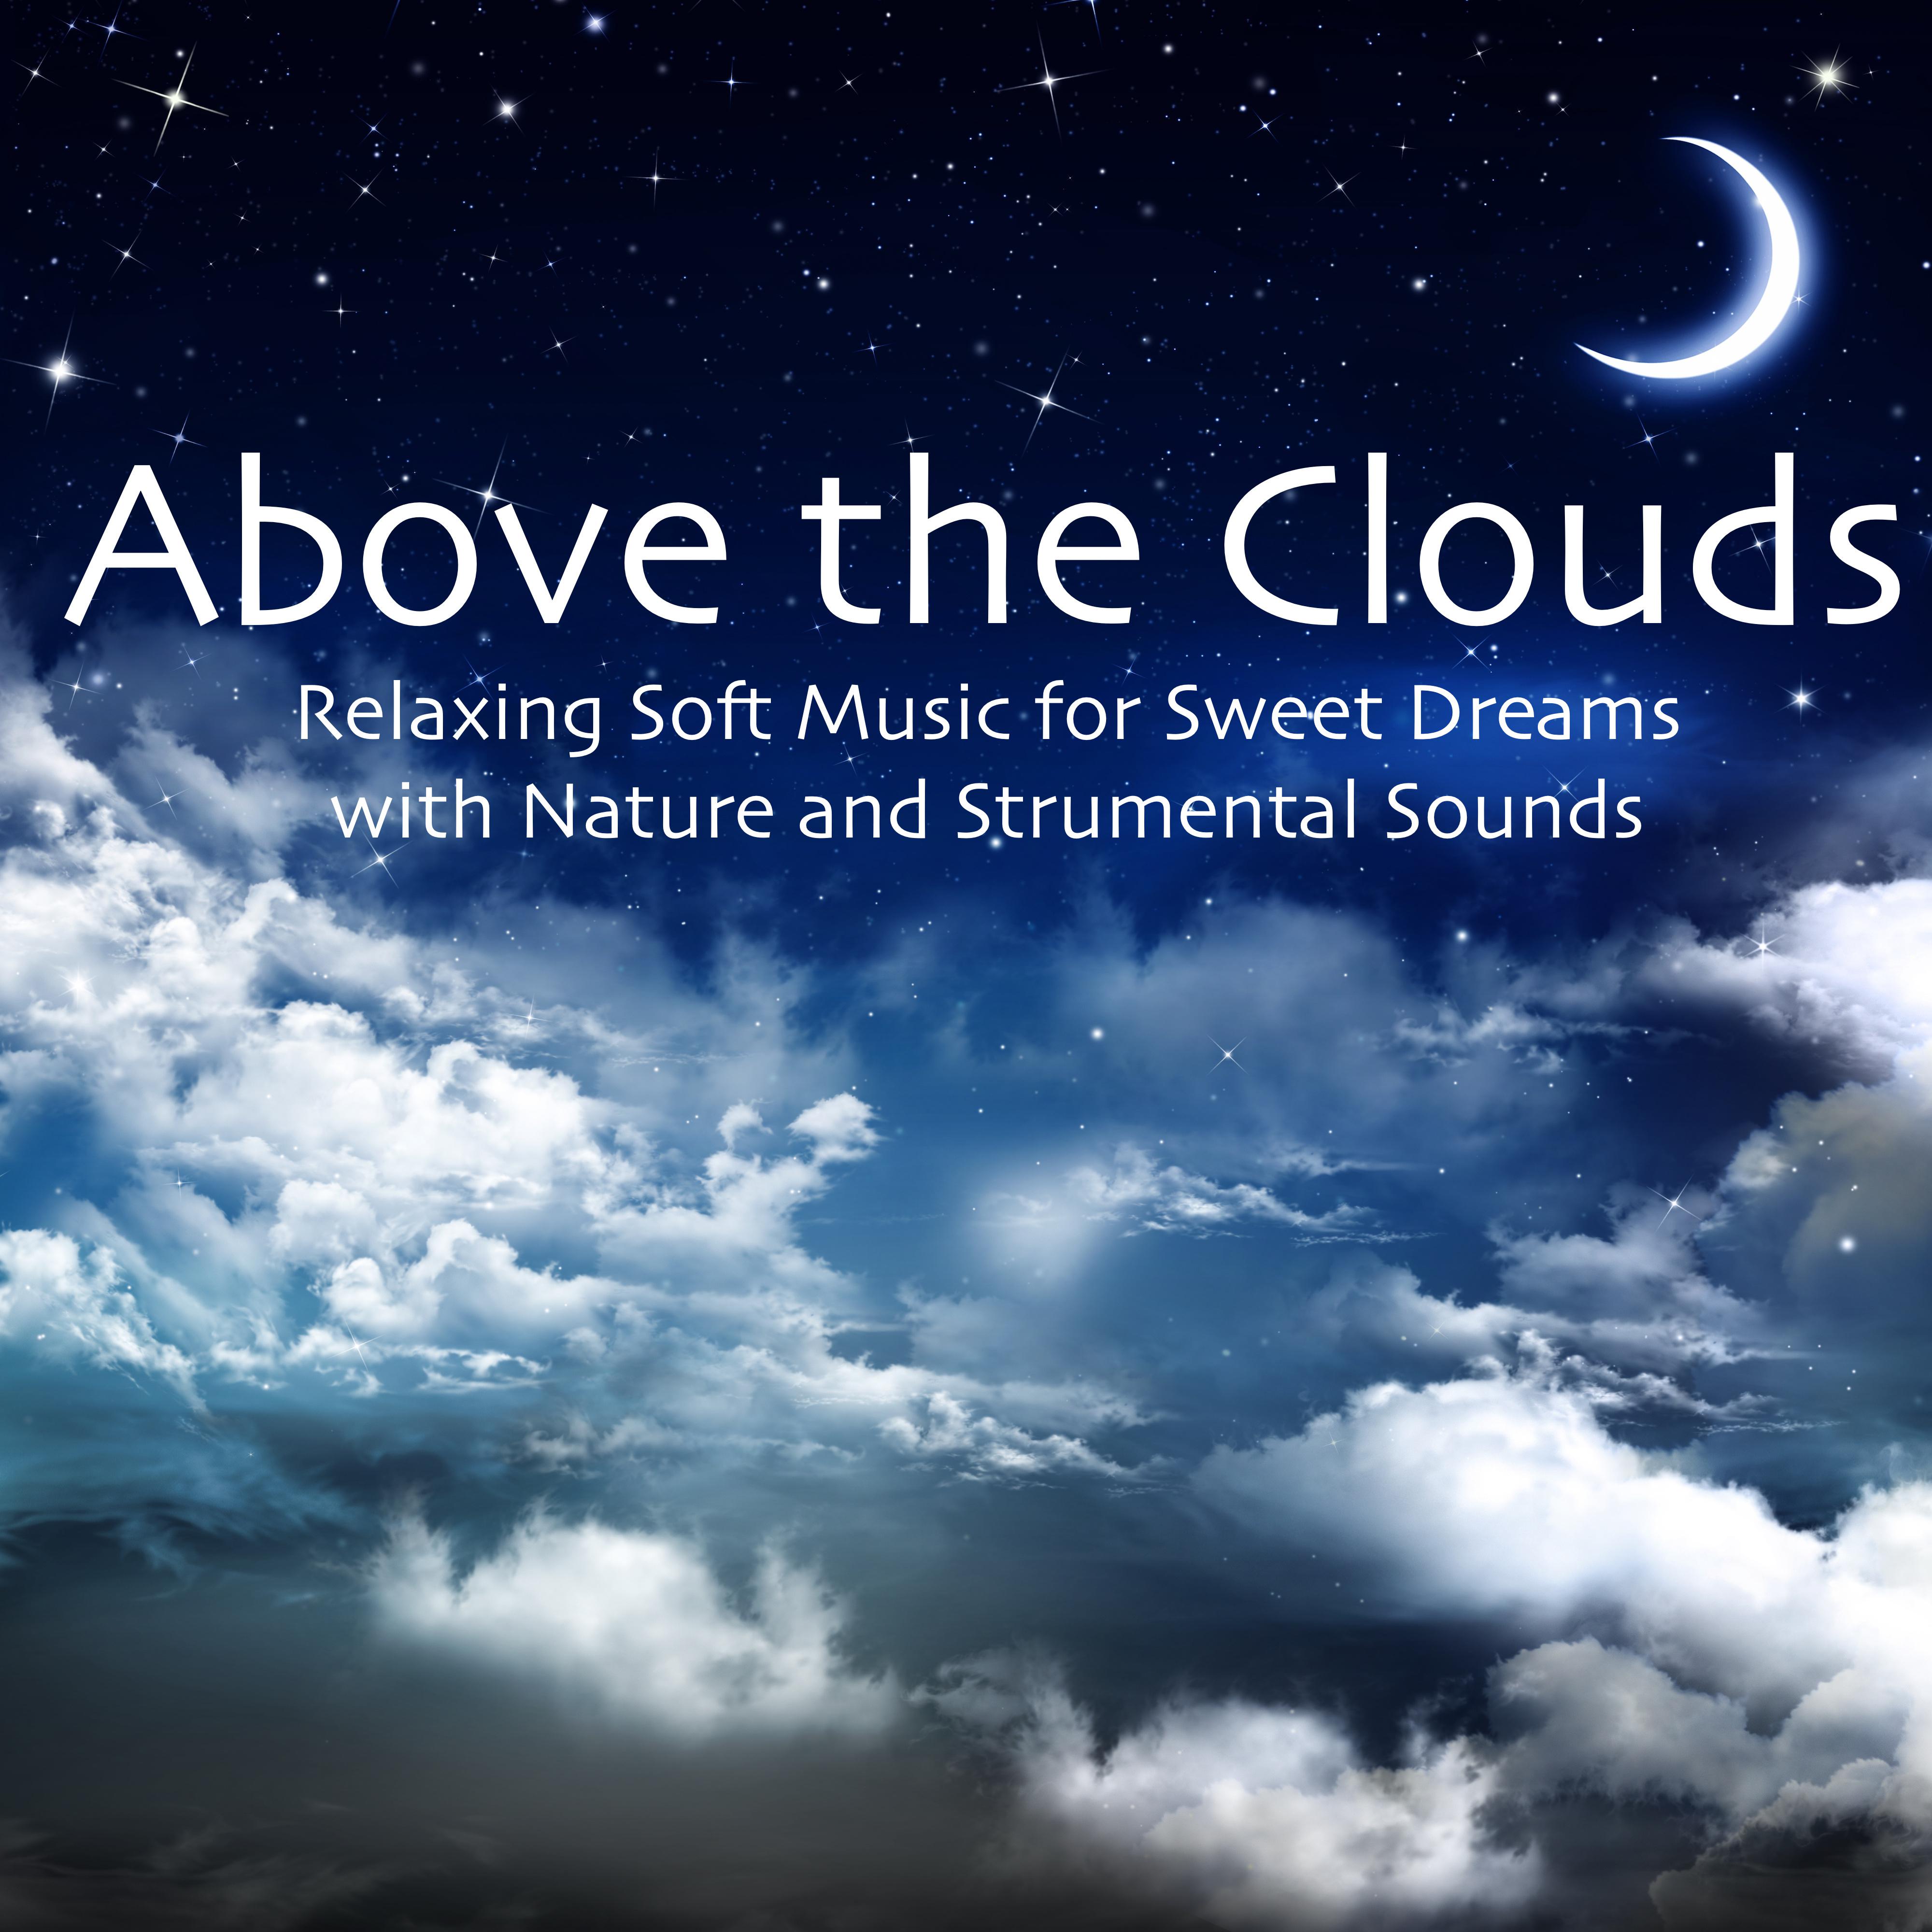 Above the Clouds: Relaxing Soft Music for Sweet Dreams with Nature and Strumental Sounds